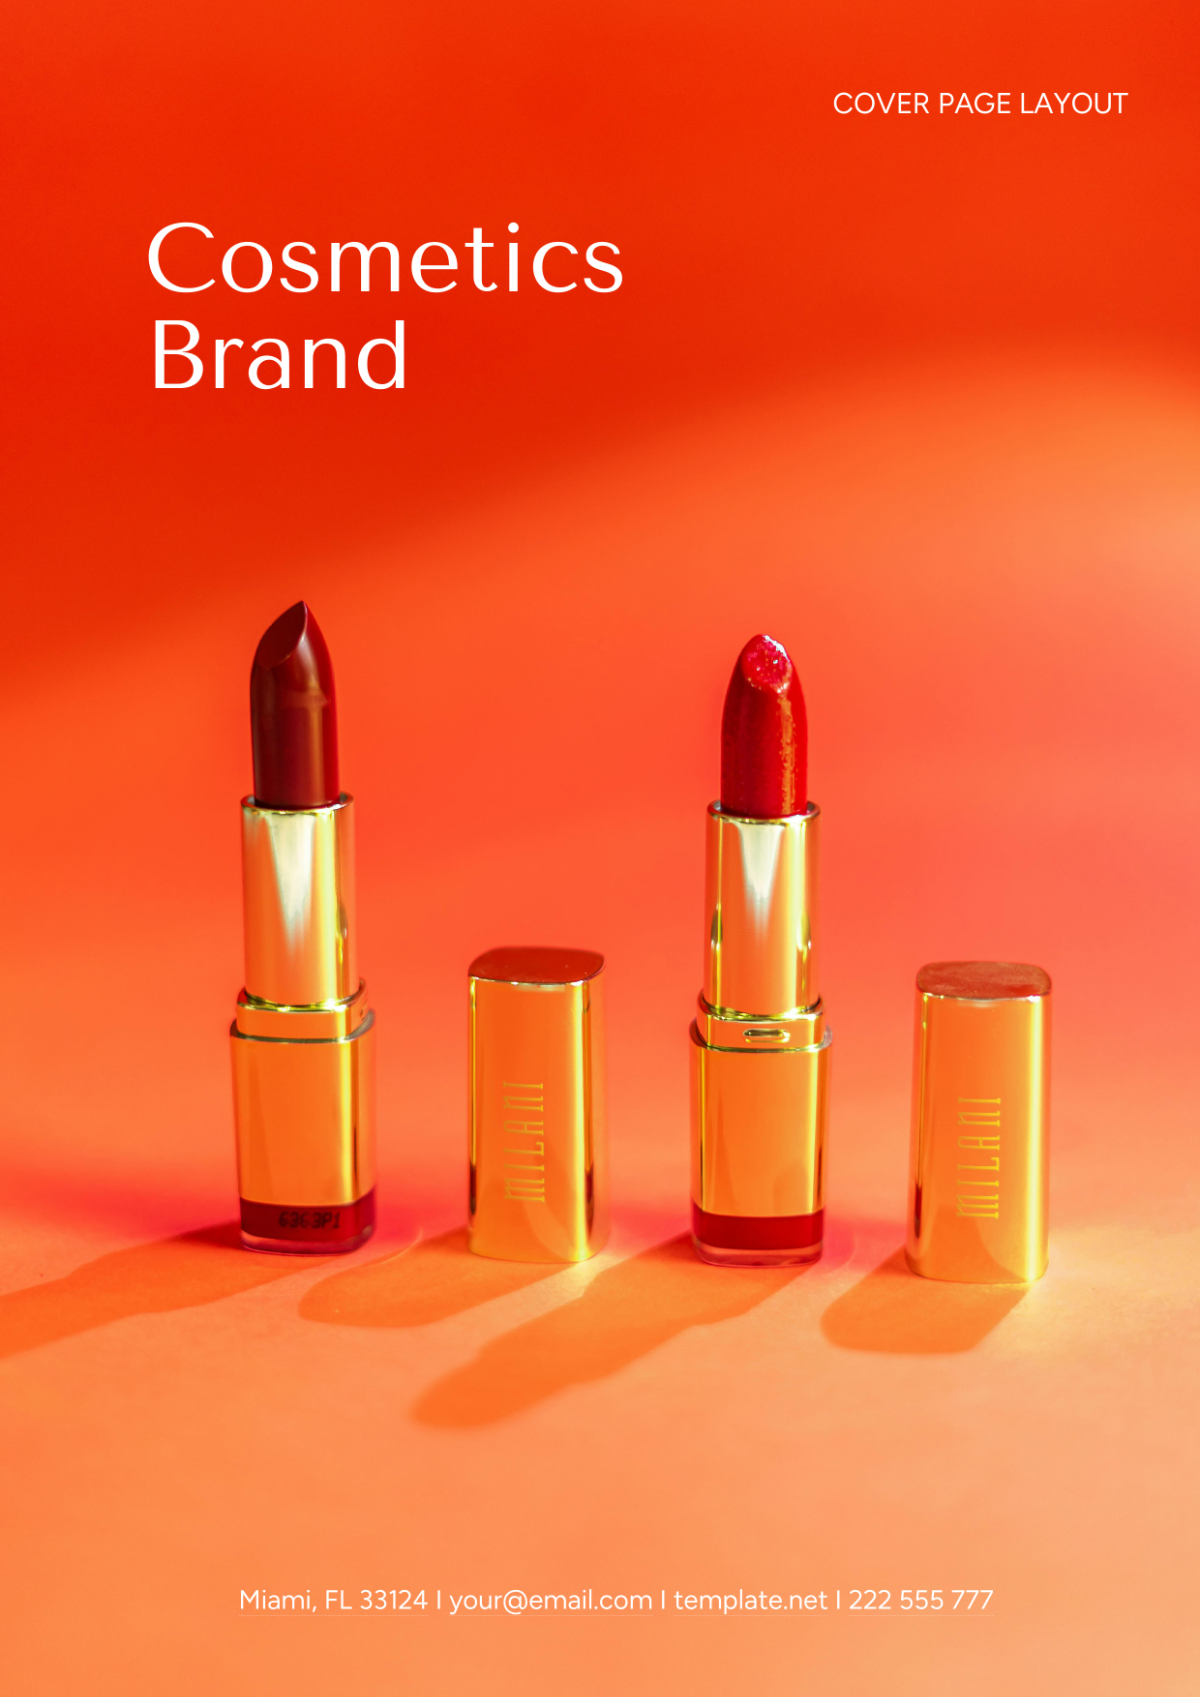 Cosmetics Brand Cover Page Layout Template